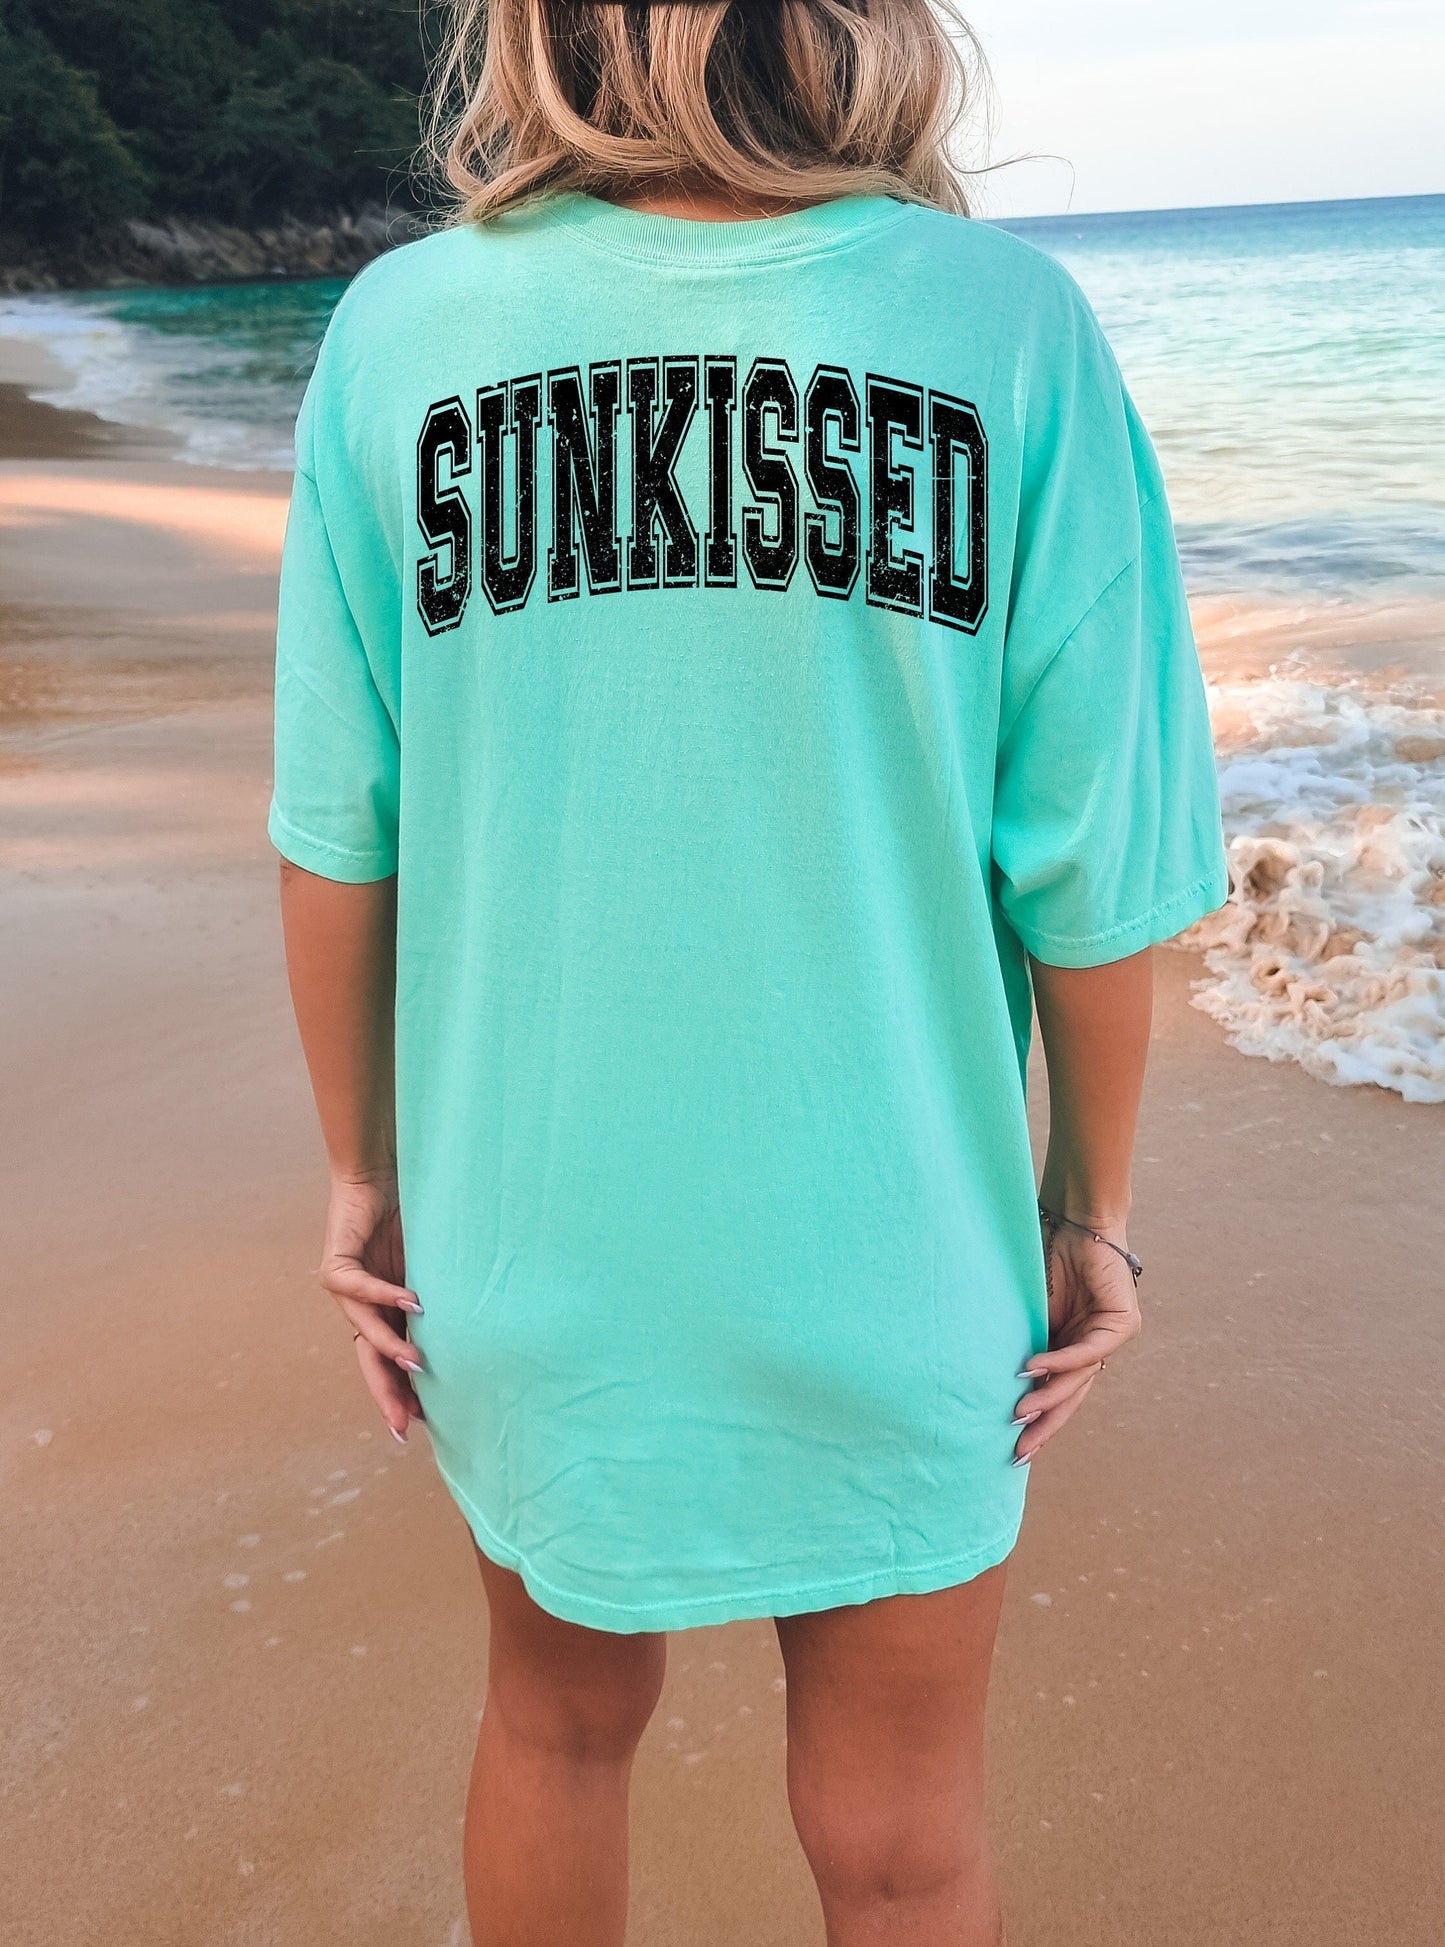 Beachy Sunkissed Distressed Tee - Summer Ready Top for Your Wardrobe